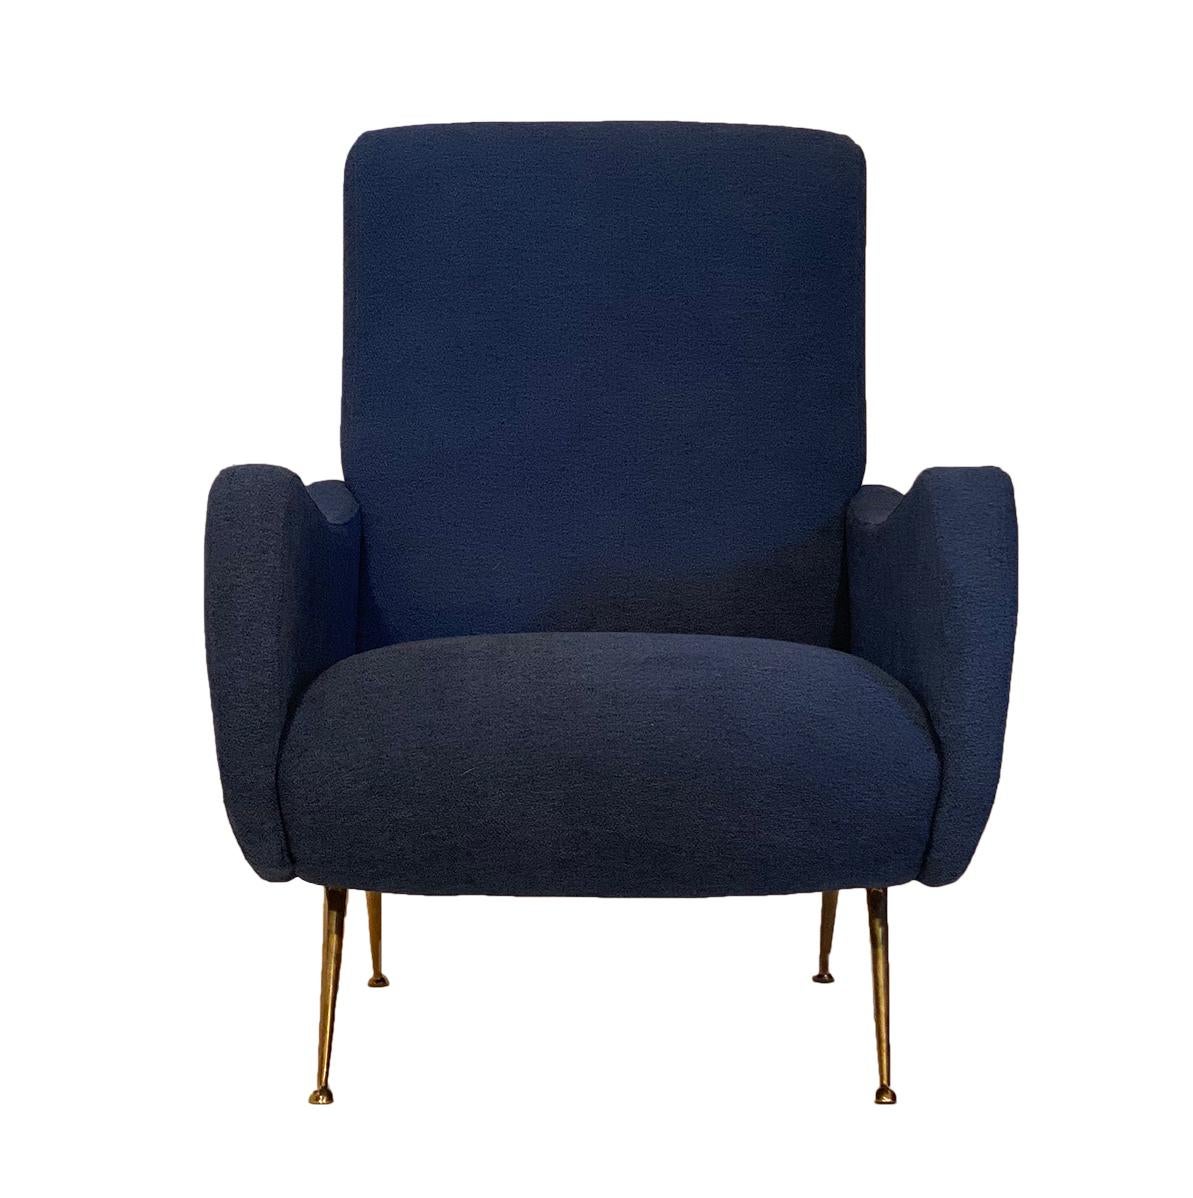 Pair of Marco Zanuso blue armchairs from Italy. This pair by Zanuso is upholstered in a midnight blue chenille blend. They have solid gilt brass feet and excellent comfort.